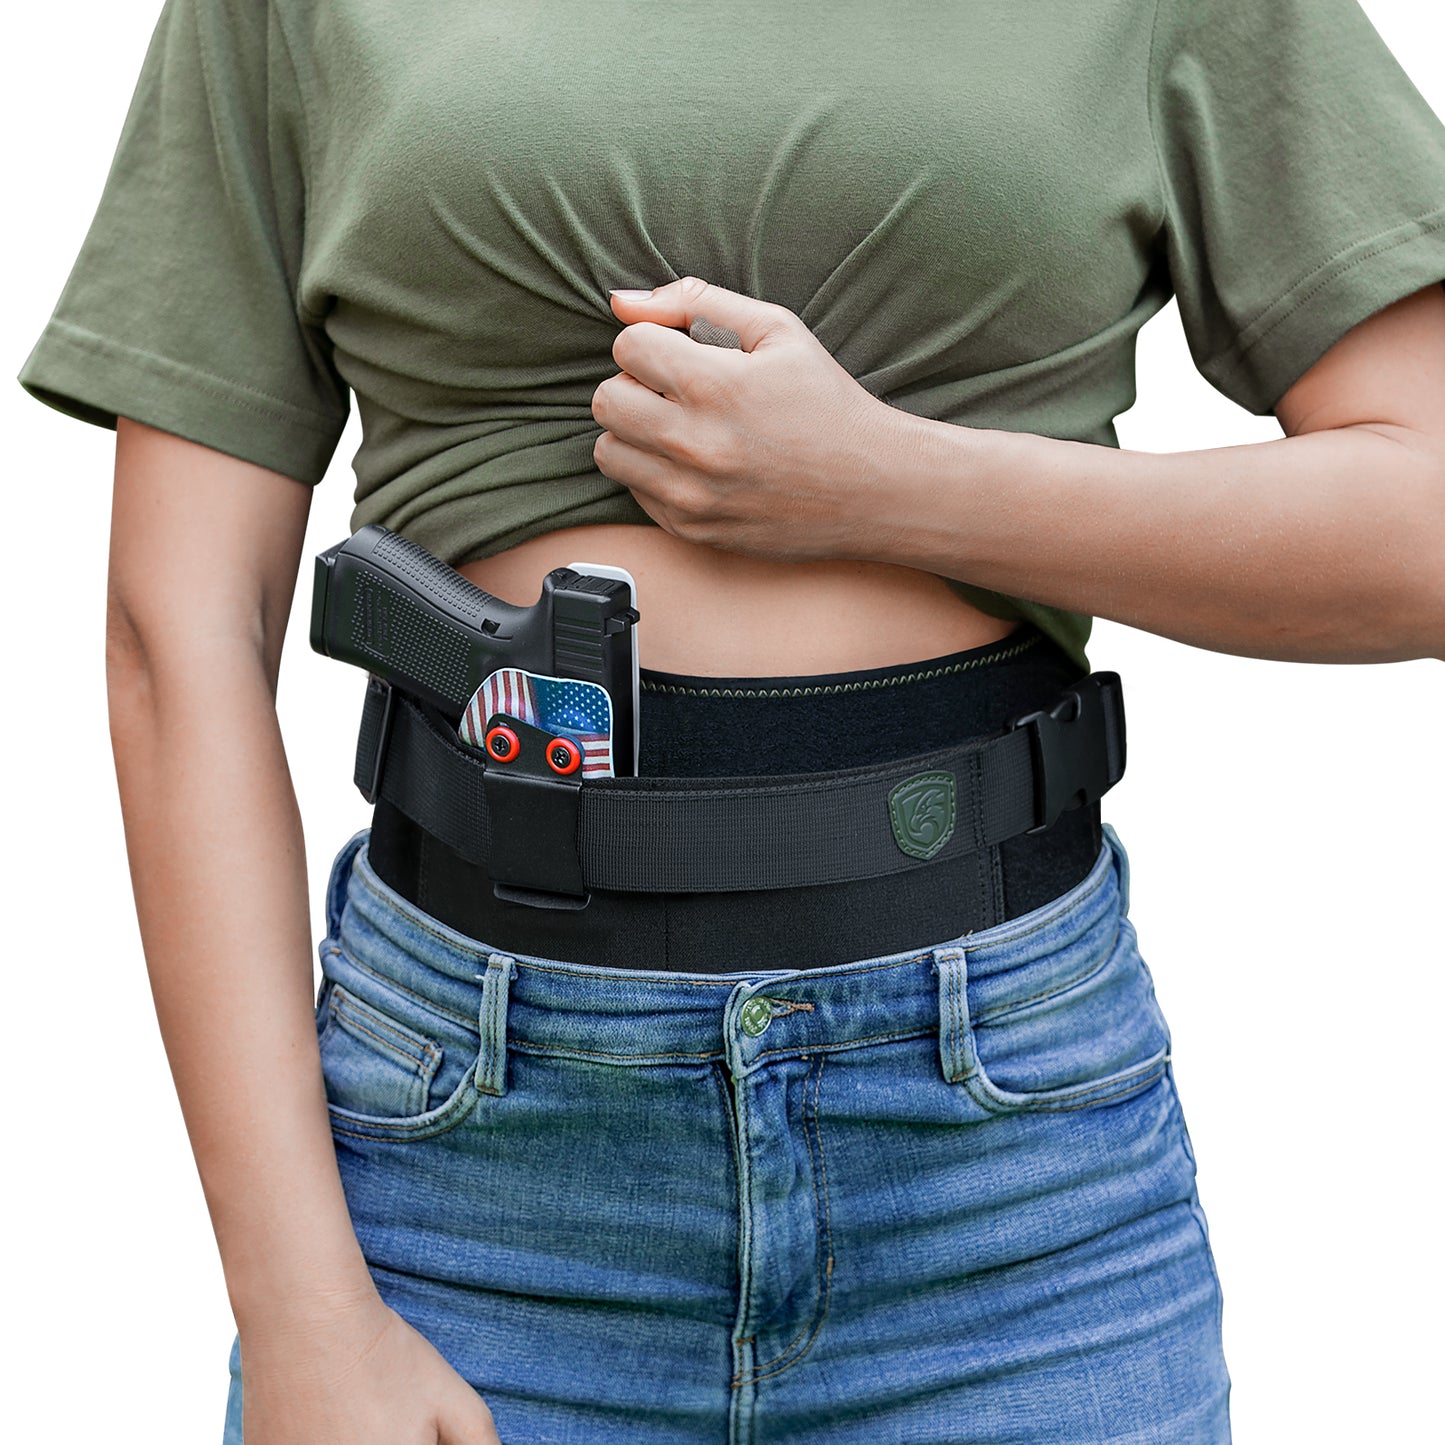 Women's Tactica IWB Concealed Carry Holster